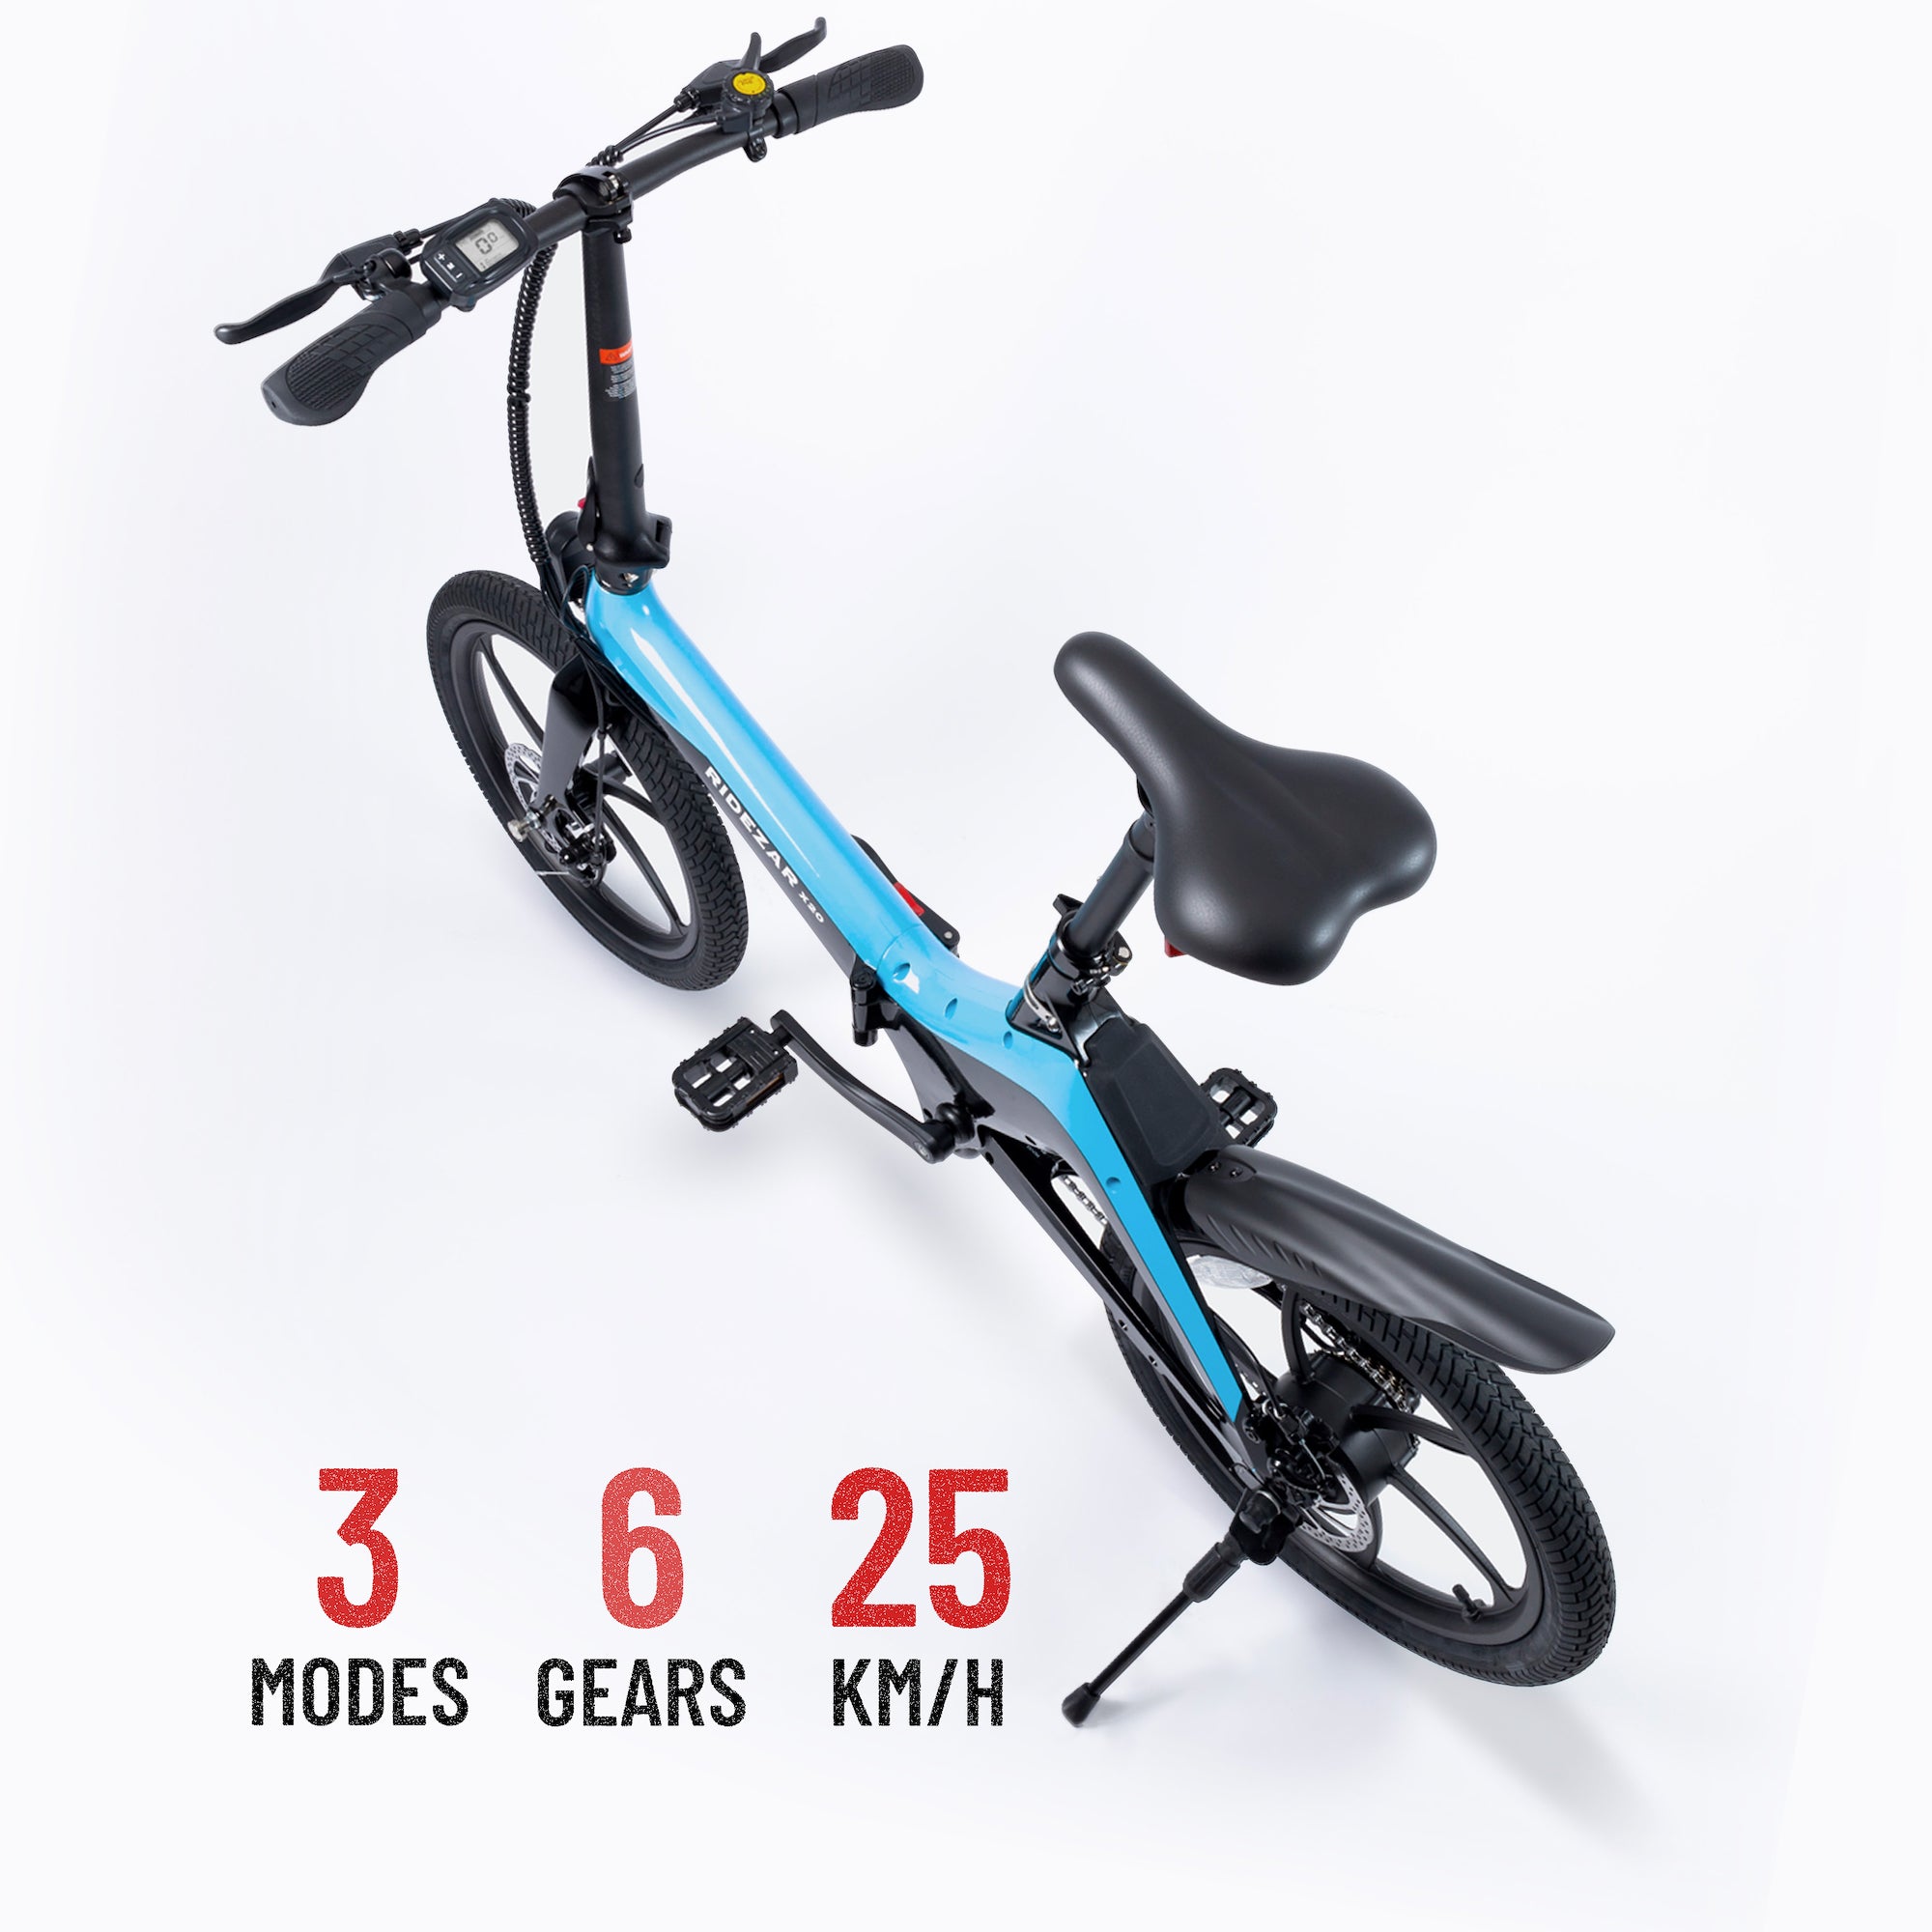 Aerial View of the 2022 Ridezar Rapid X20 Foldable Electric Bike